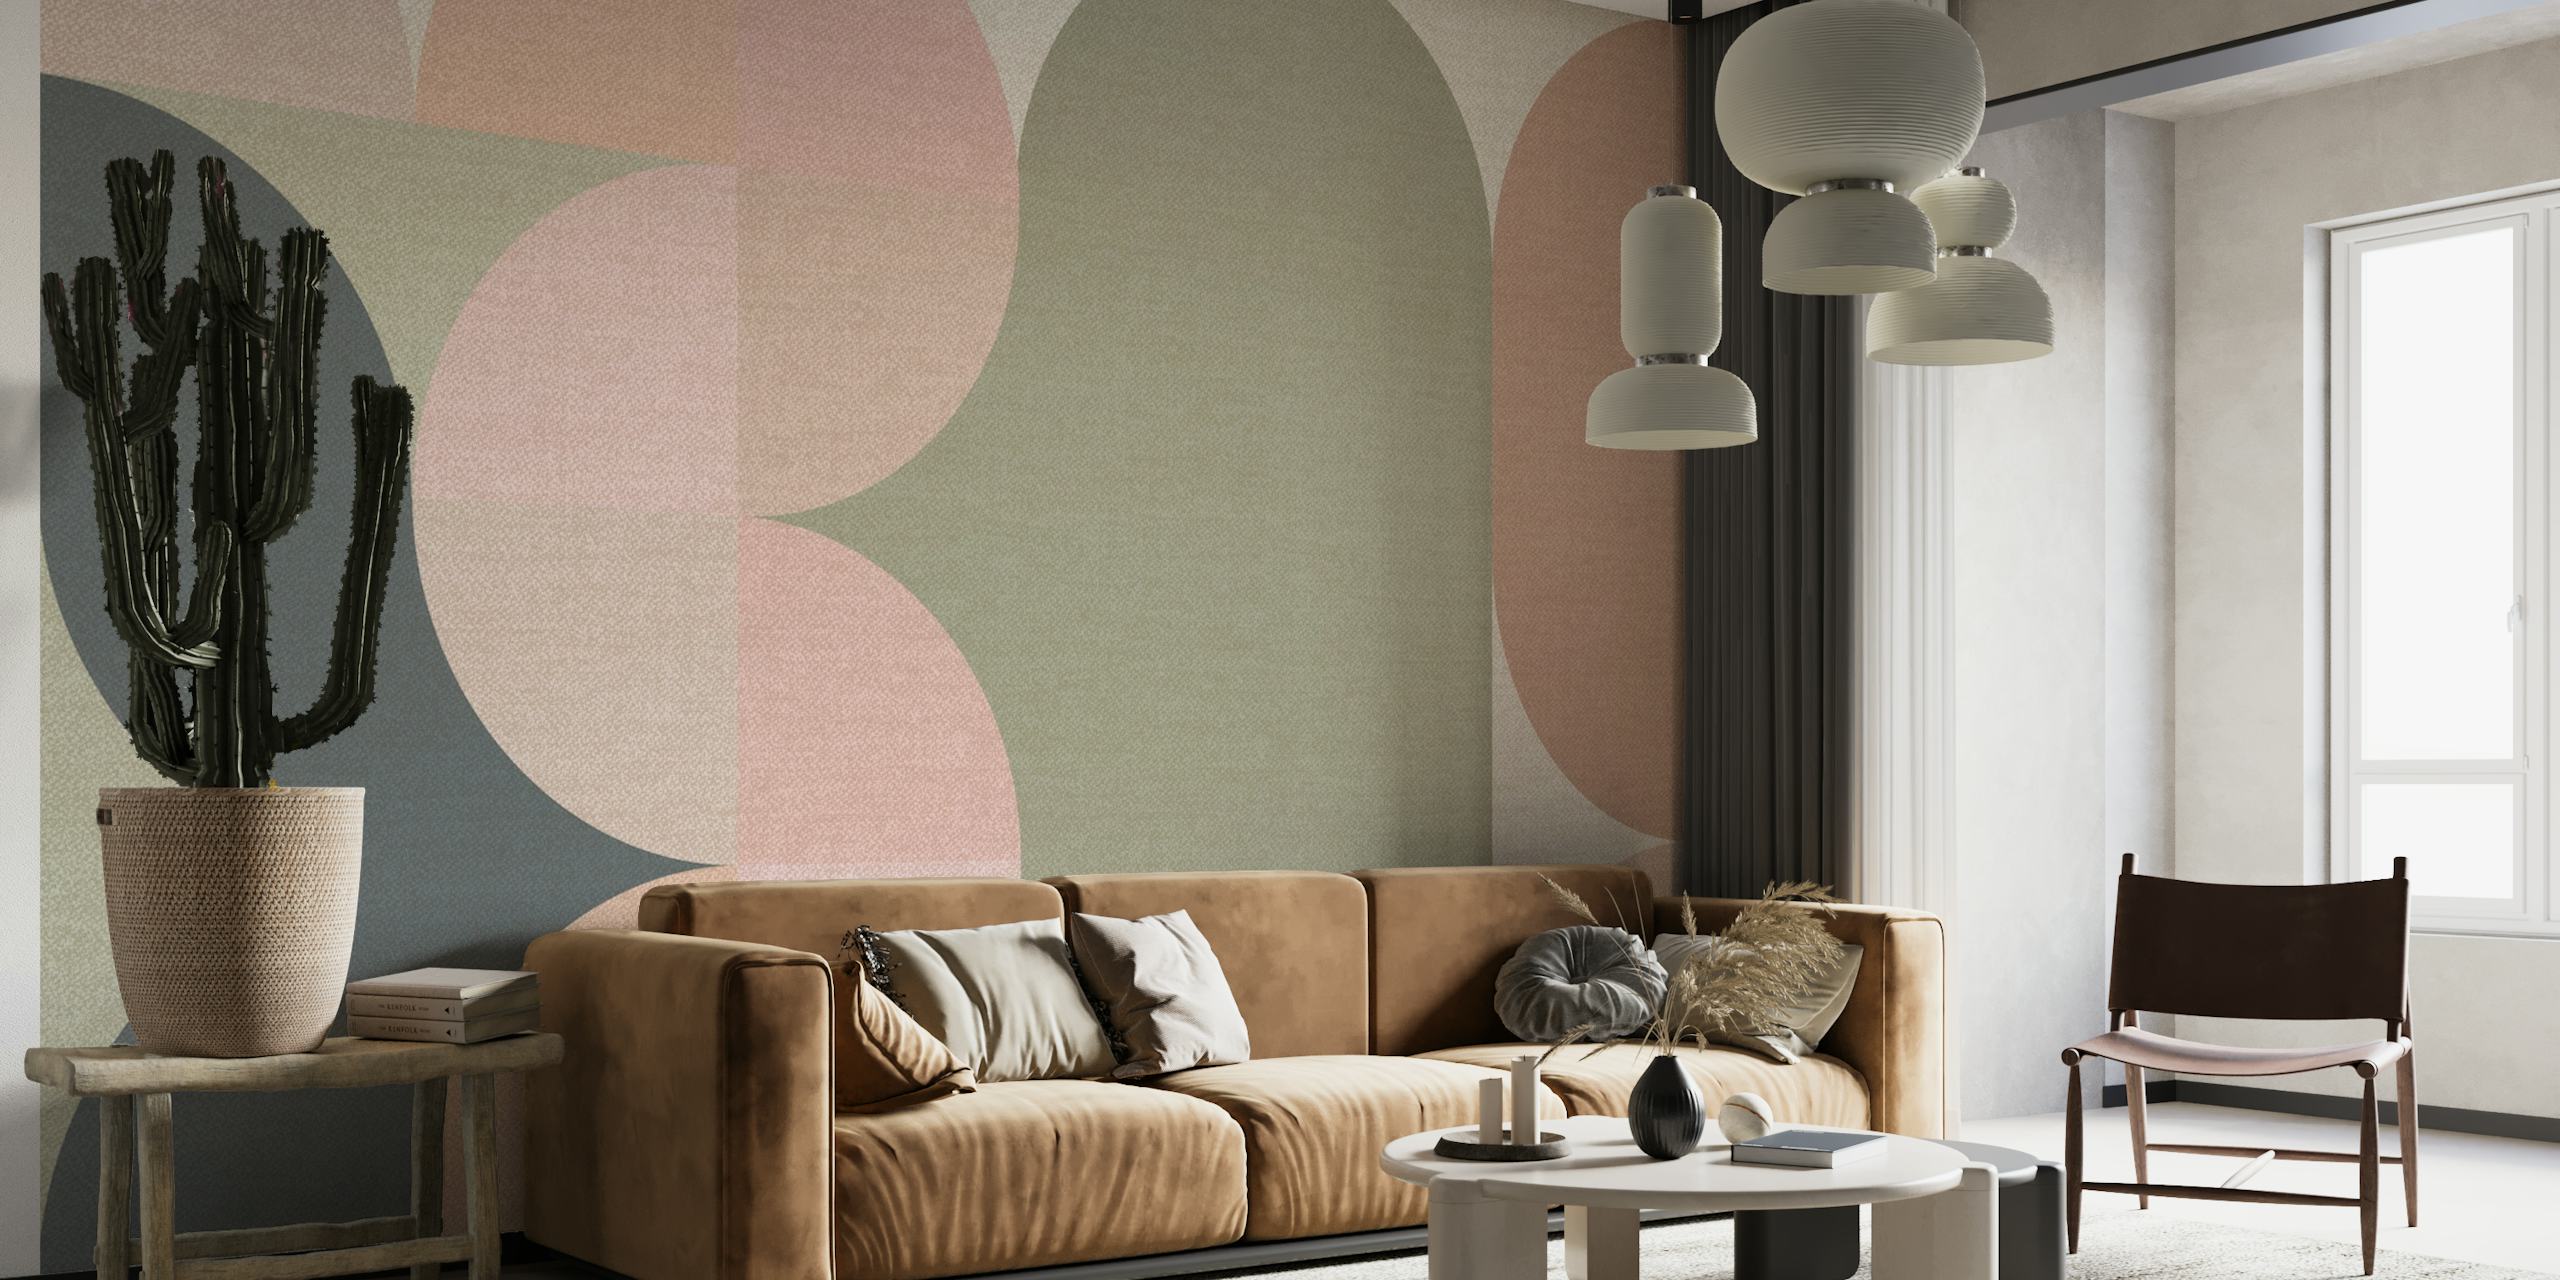 Muted Geometric Mid-Century Abstract Rounds papel pintado